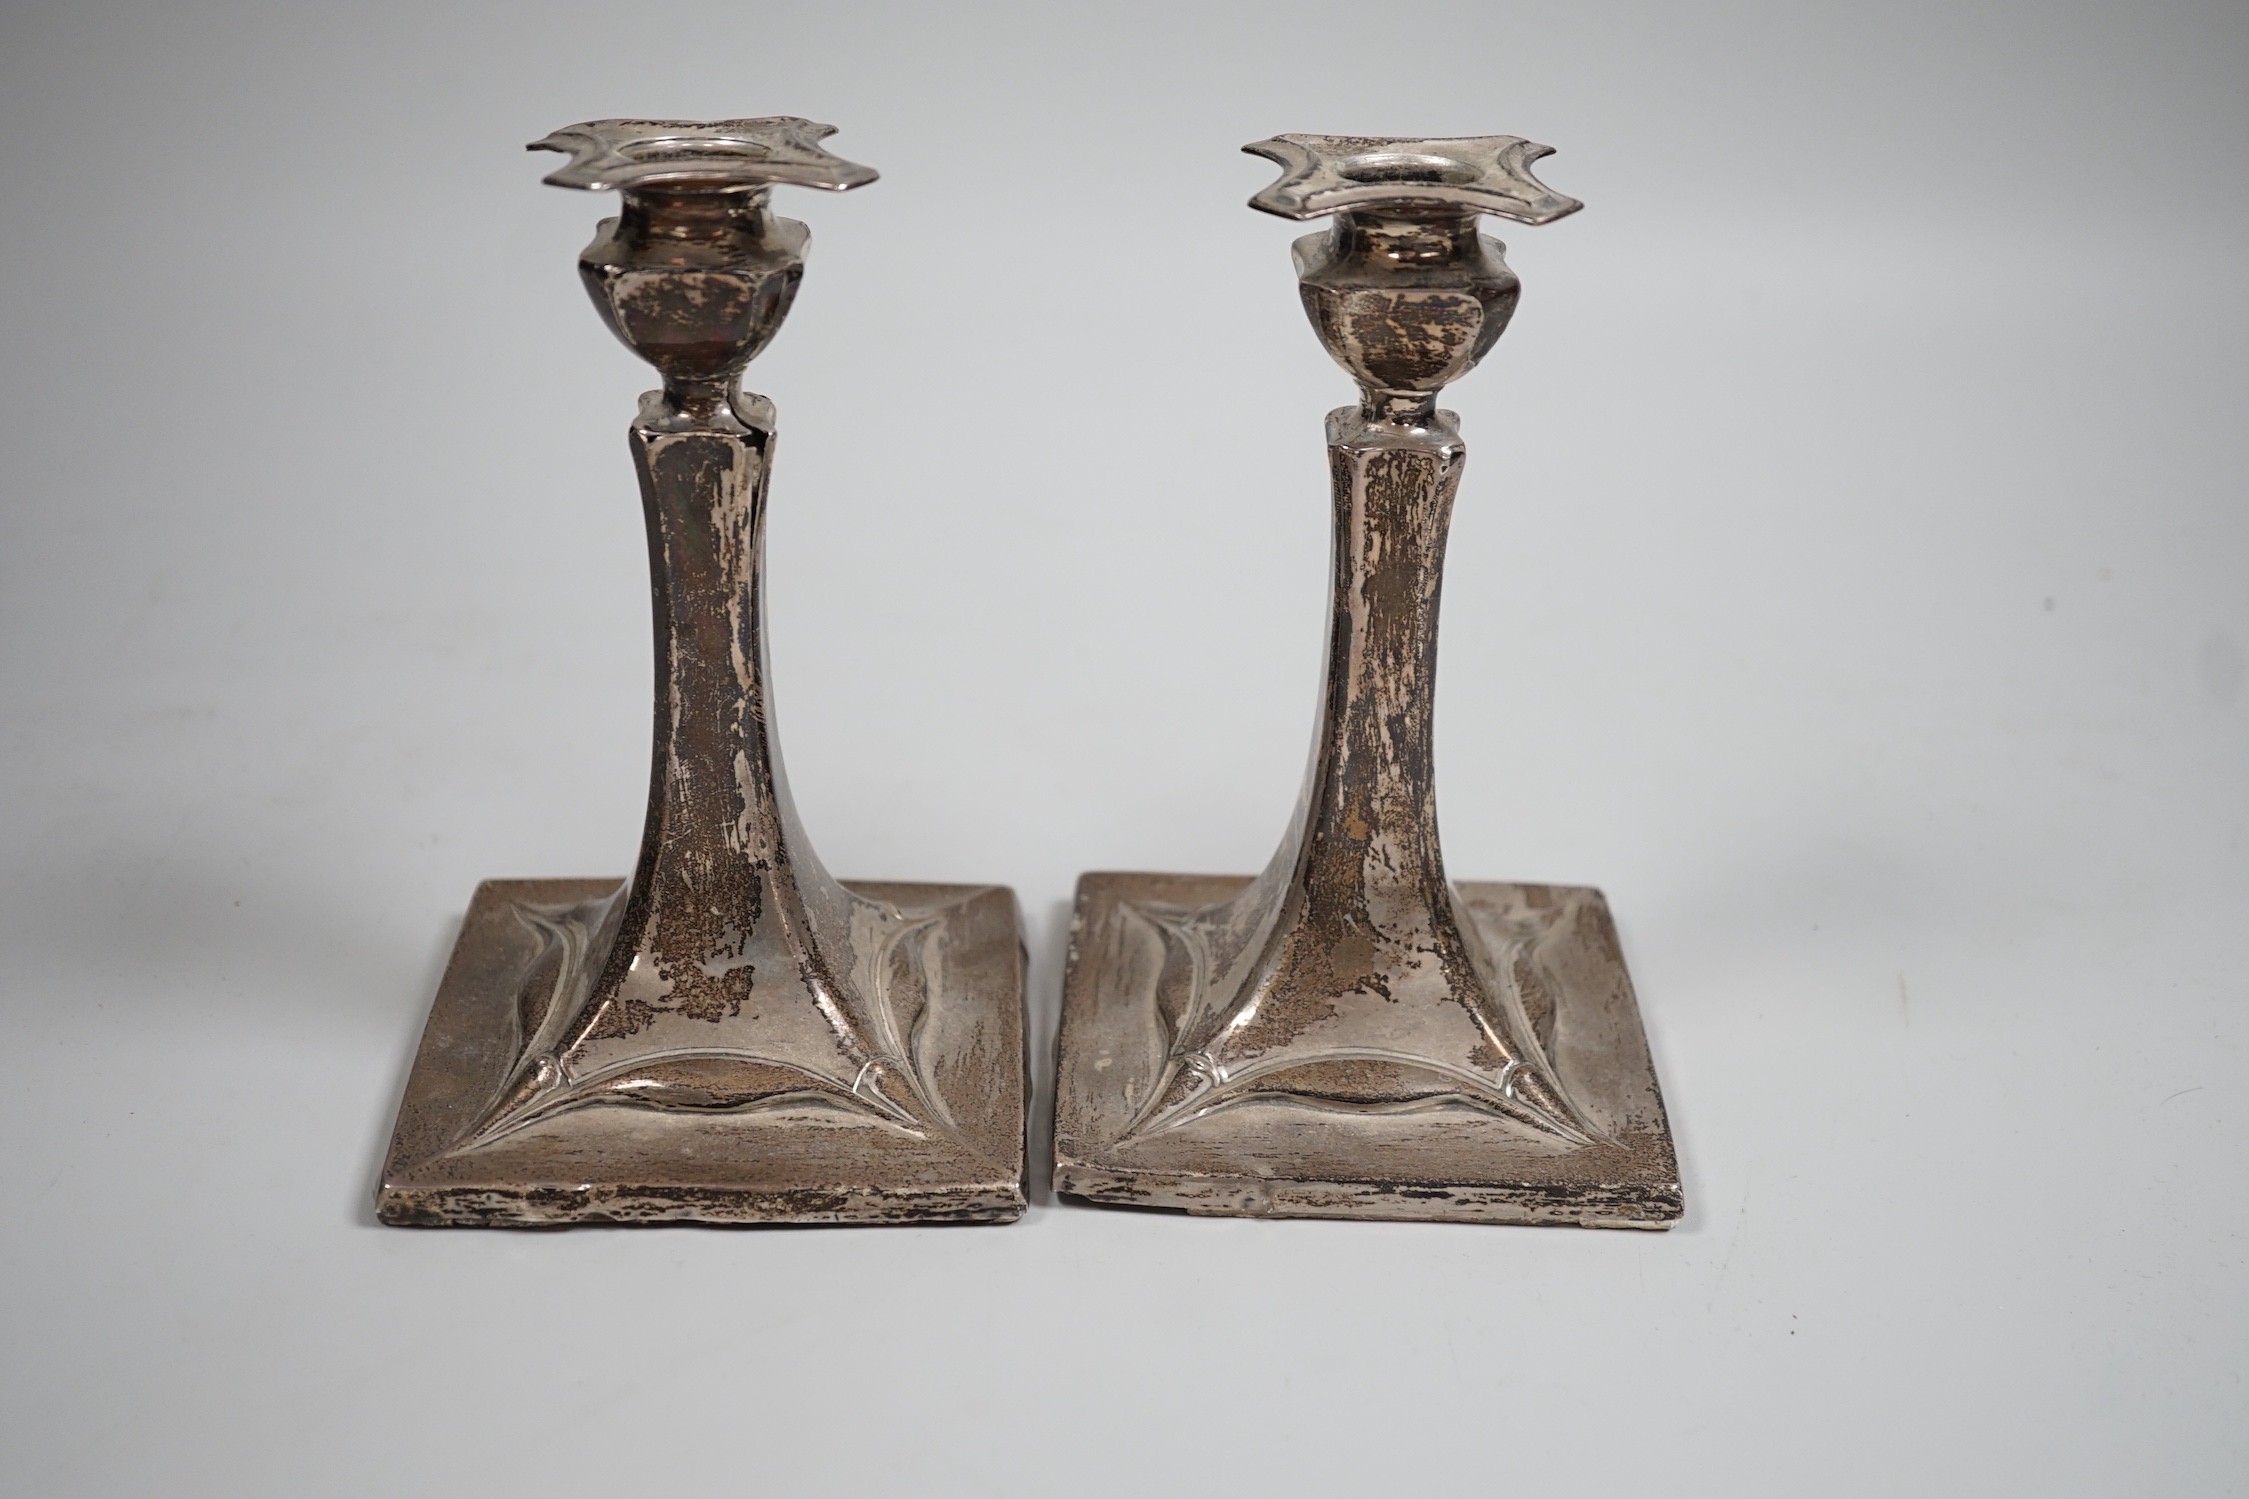 A pair of early 20th century Art Nouveau silver mounted candlesticks, marks rubbed (a.f.), height 15.2cm.